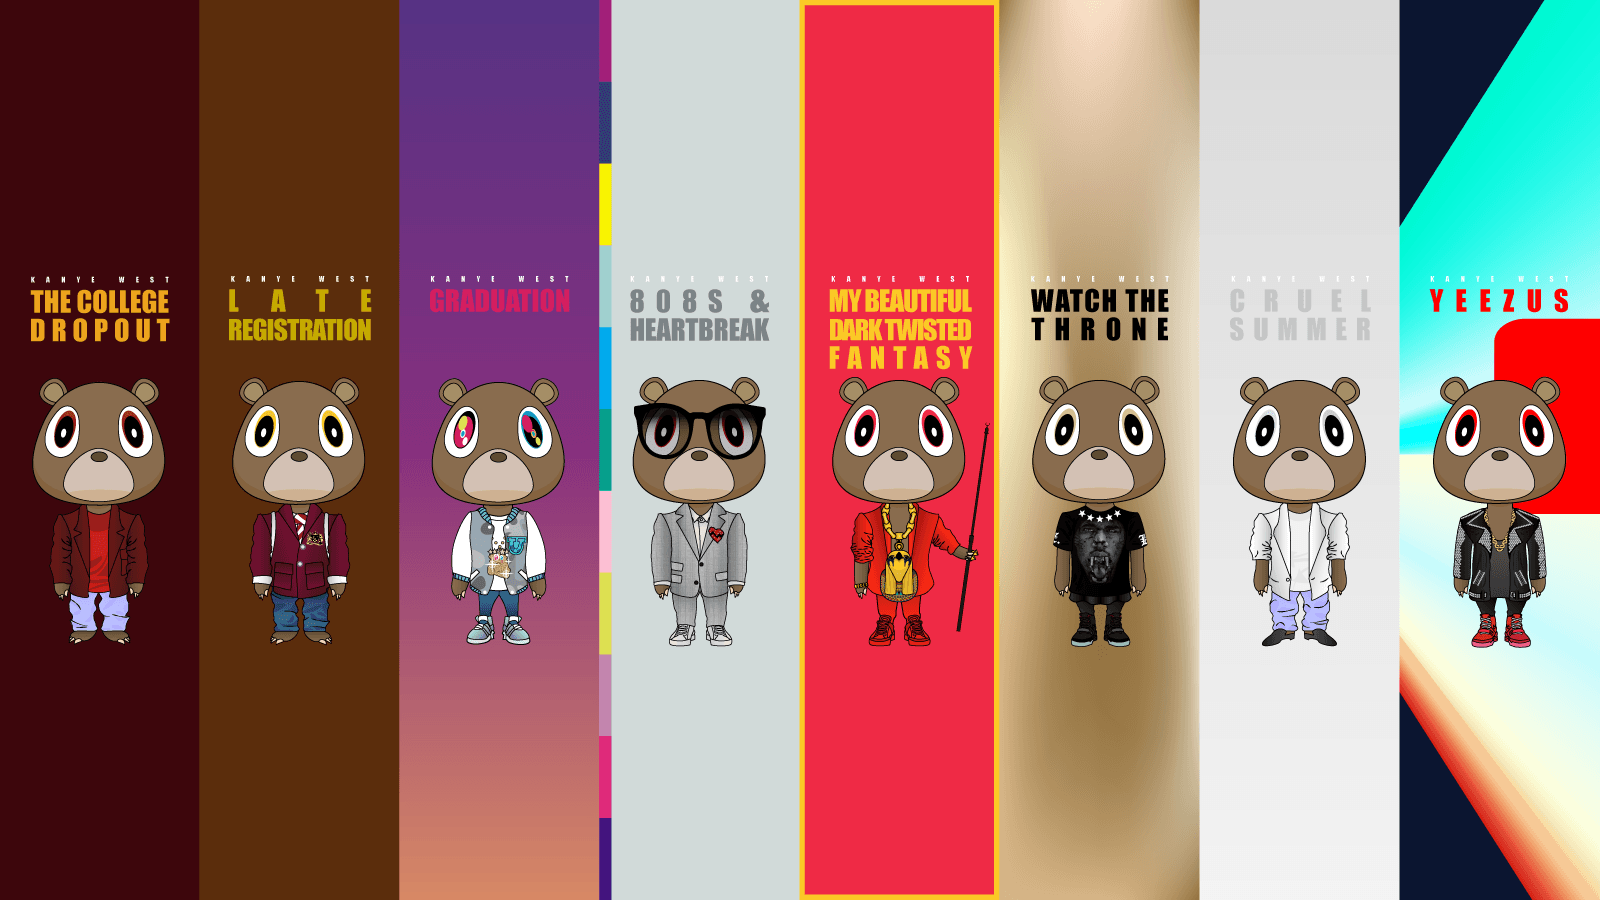 Kanye West Picture Desktop Wallpapers Box.